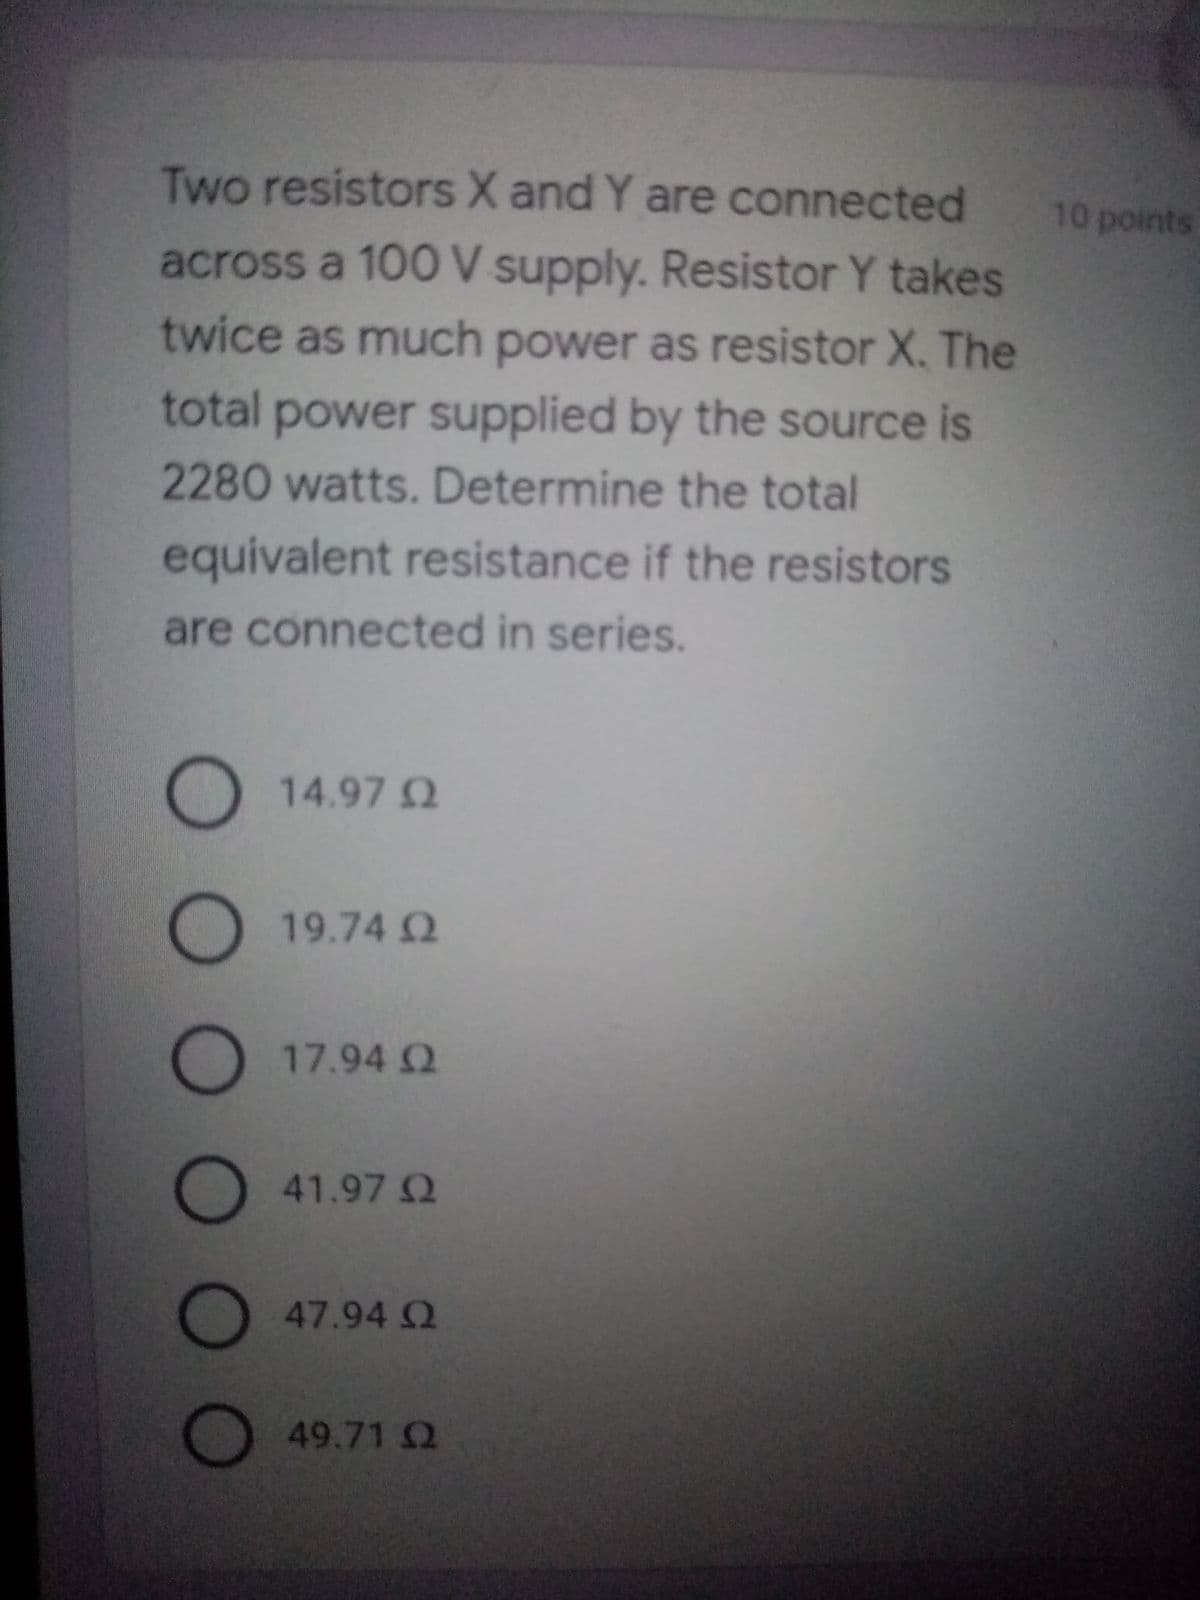 Two resistors X and Y are connected
10 points
across a 100 V supply. Resistor Y takes
twice as much power as resistor X. The
total power supplied by the source is
2280 watts. Determine the total
equivalent resistance if the resistors
are connected in series.
14.97 Q
19.74 Q
17.94 Q
41.97 2
47.94 Q
49.71 Q
OO O 0
